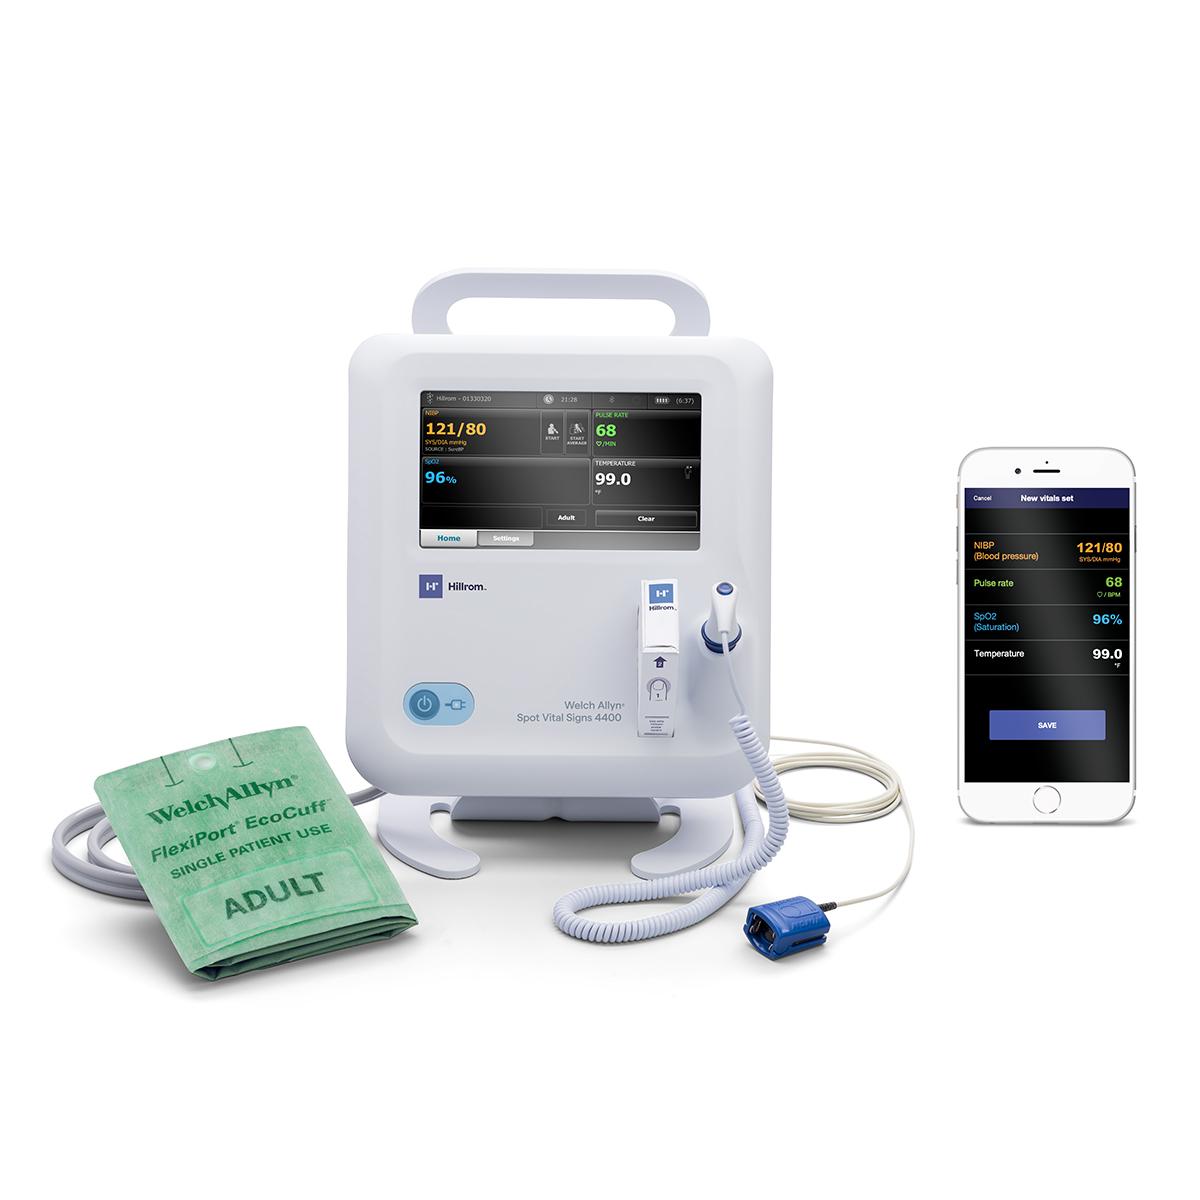 Patients capture their vital signs with the Welch Allyn® Spot Vital Signs® 4400 Device and send data to their Hillrom™ Connex® App via Bluetooth®. 3.	https://hillrom.dam.aprimo.com/Assets/Records/~5680aaf2a3894f89a6e0abea00f336e4 a.	Alt text suggestion: Clinicians access patient data via the web-based Hillrom™ Connex® Clinical Portal.